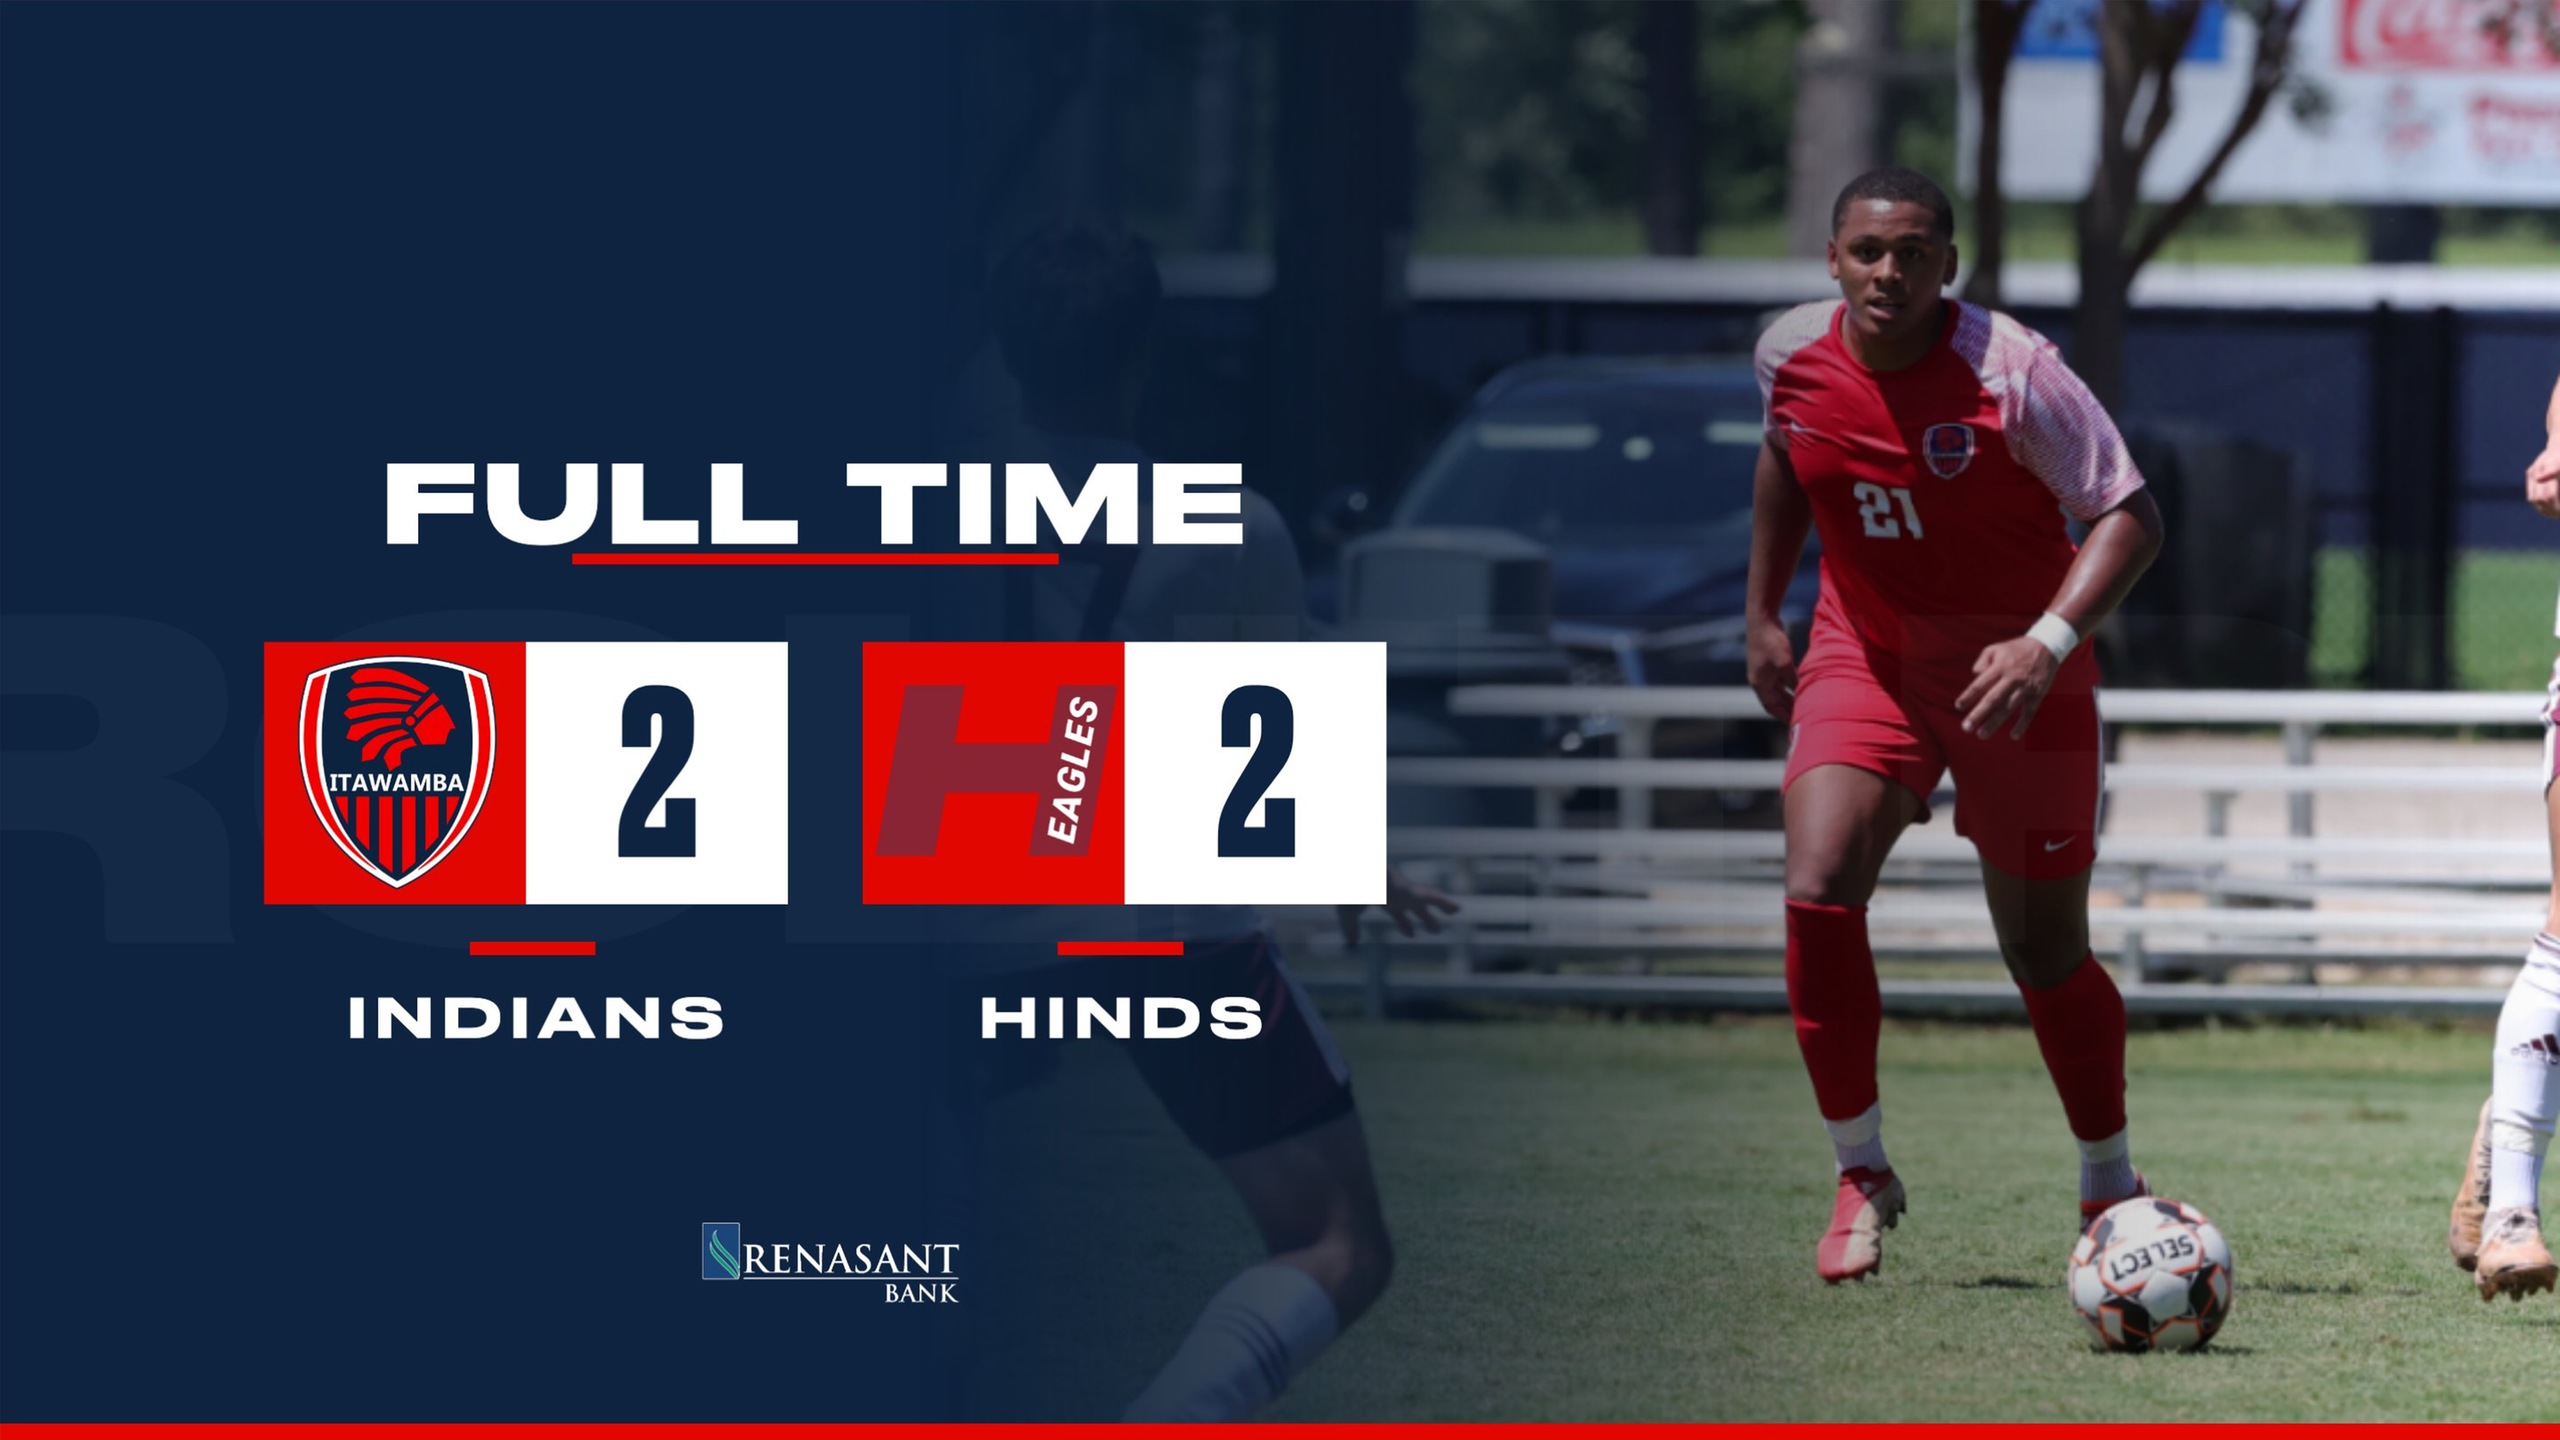 Indians, Hinds ends in draw